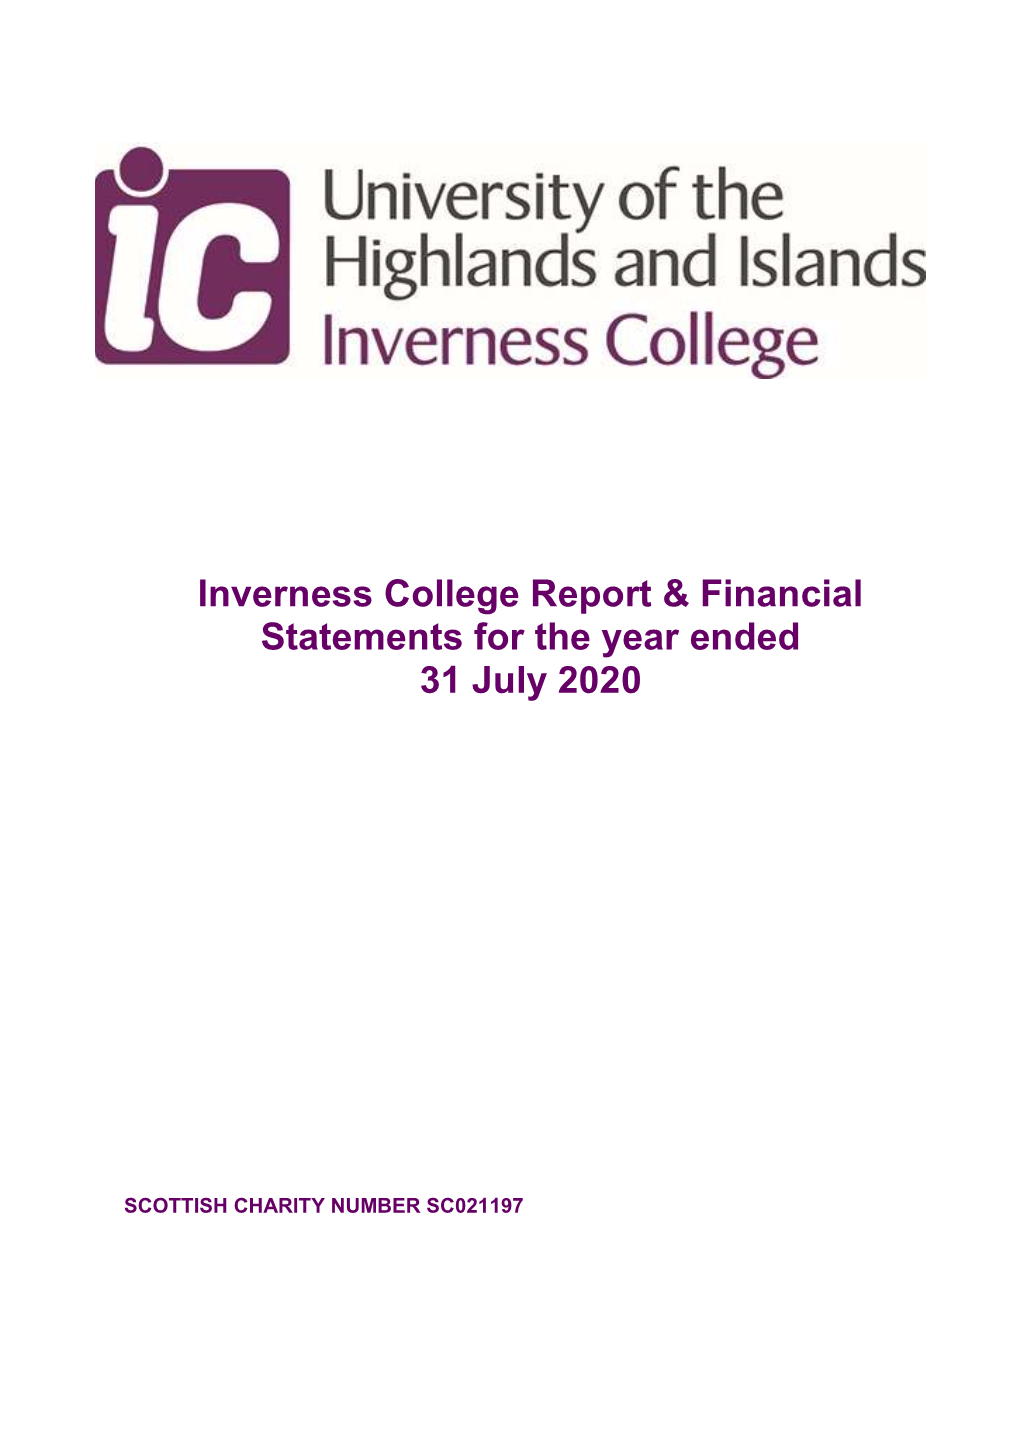 Inverness College Report & Financial Statements for the Year Ended 31 July 2020